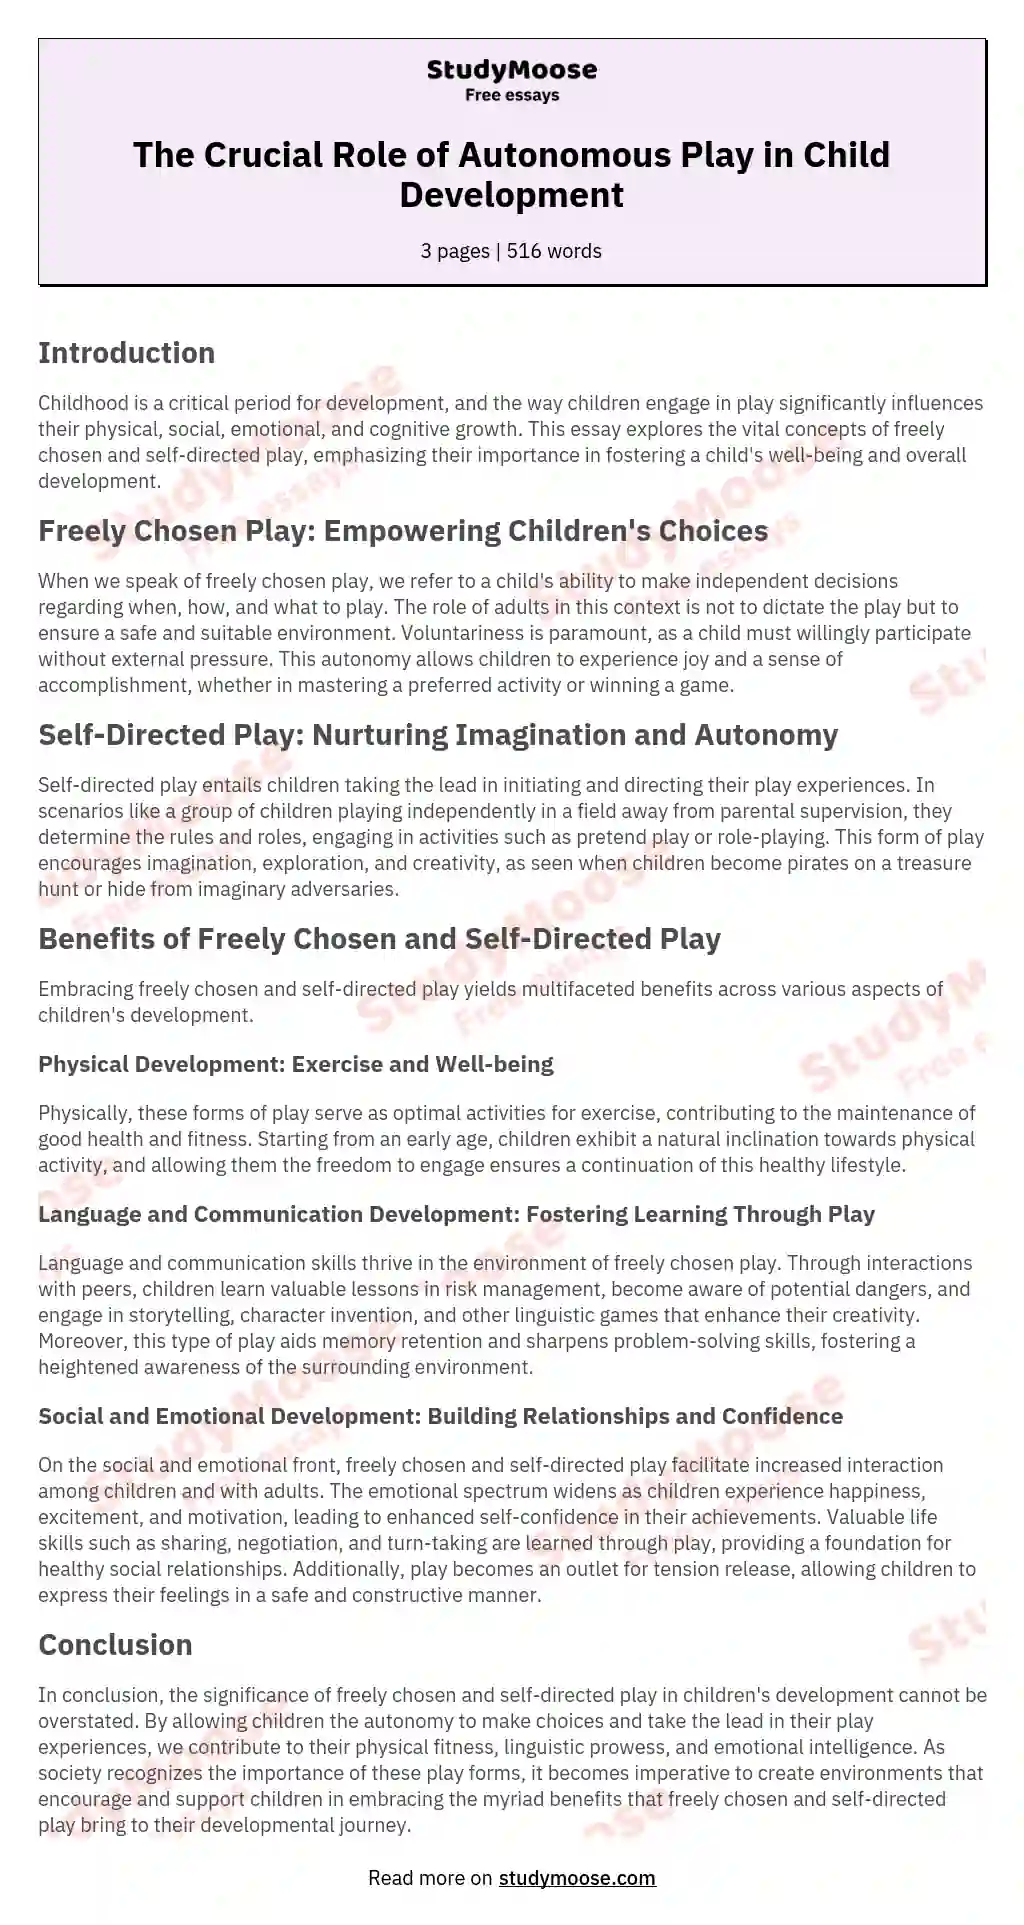 The Crucial Role of Autonomous Play in Child Development essay